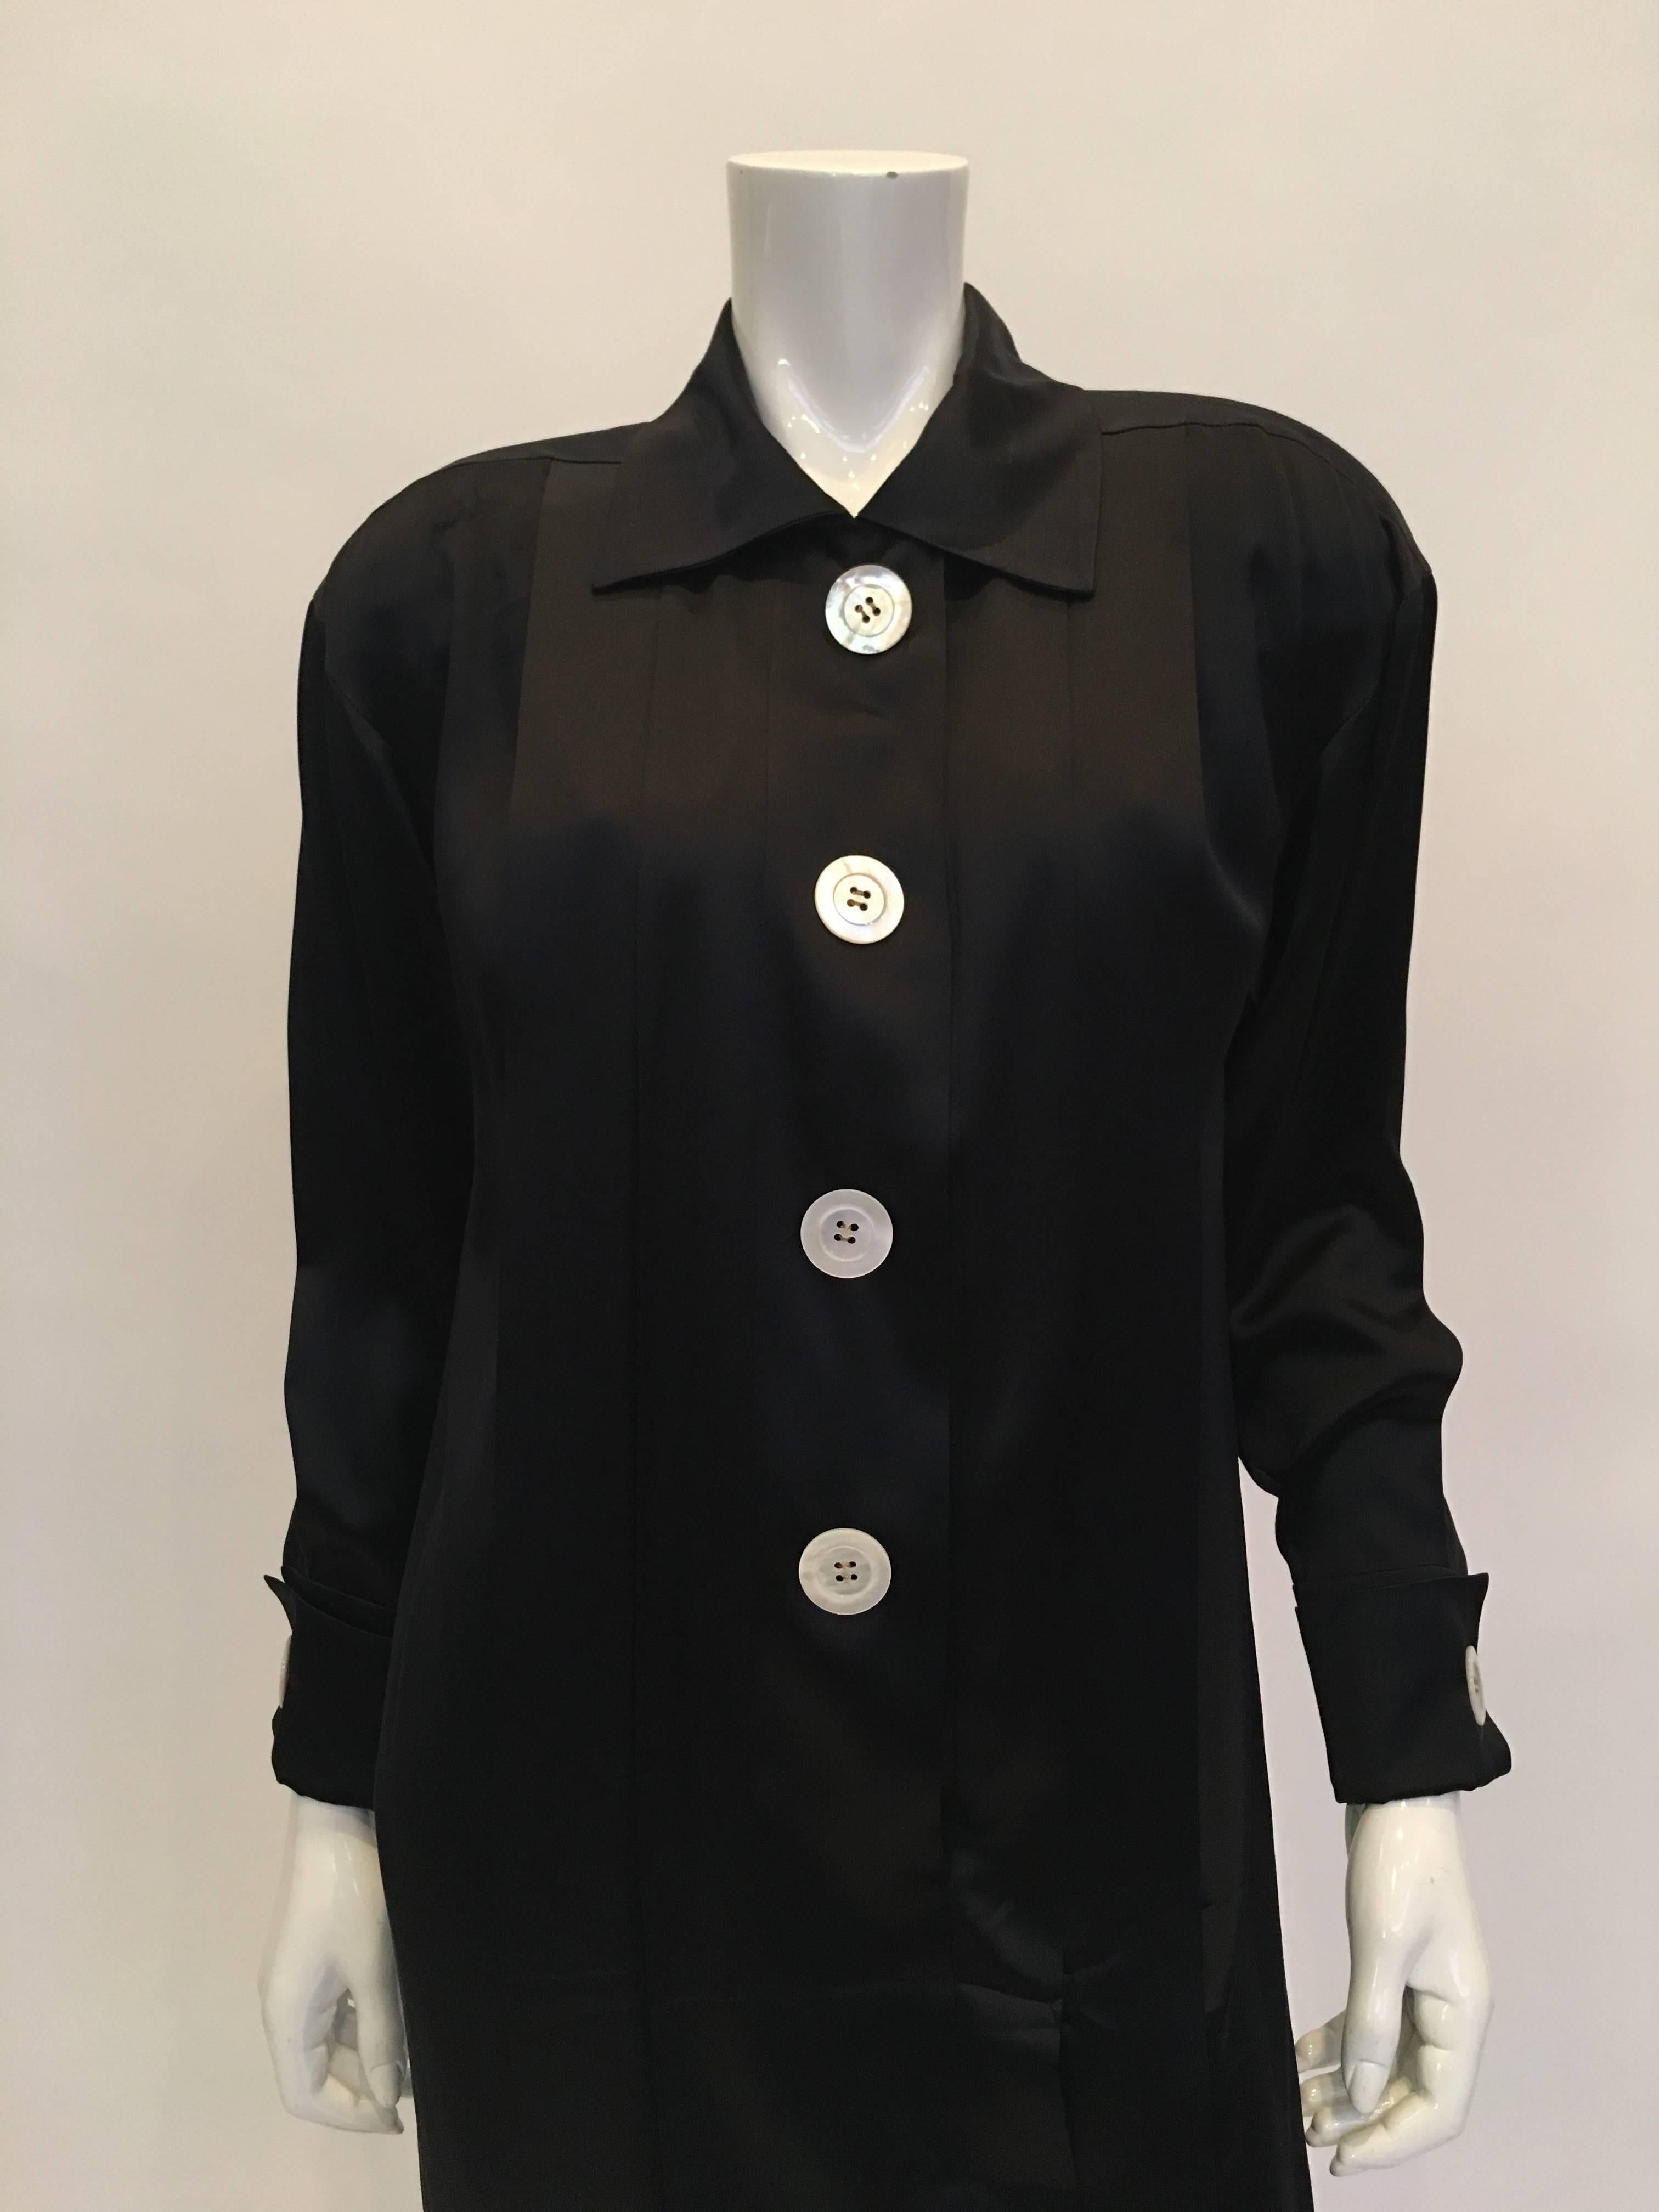 Chanel 1990's Black Satin Sheath Dress. 4 button pleated front and back with 2 hidden pockets.
Classic 90's Chanel Satin Dress.
*ALL MEASUREMENTS TAKEN FLAT*

Mannequin measures size 4 , dress fits mannequin.

Shoulder to shoulder - 19.5 inches